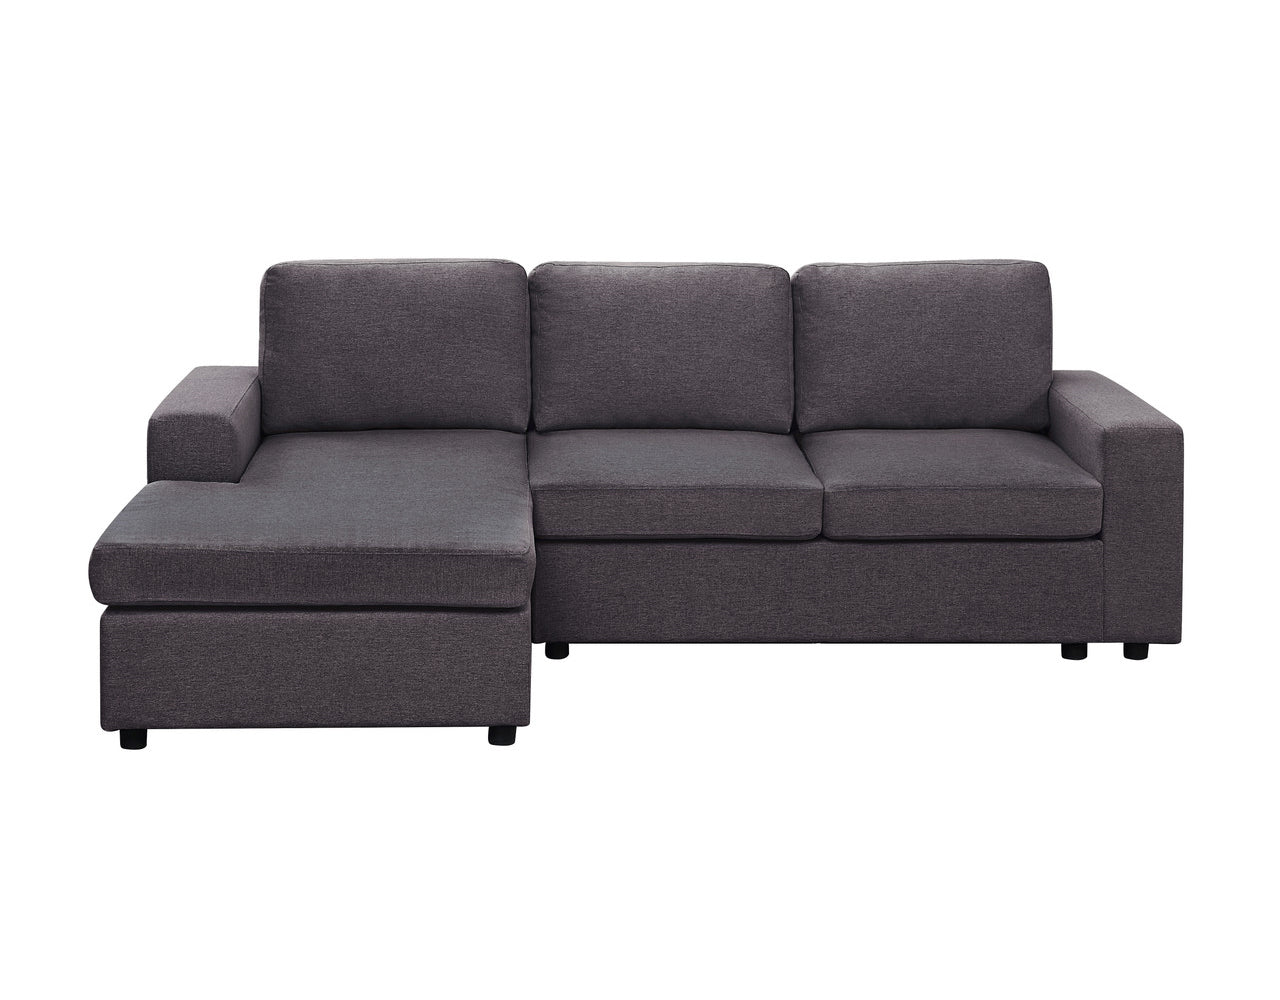 Newlyn Linen 3 Seater Sectional Sofa Reversible - Sofas